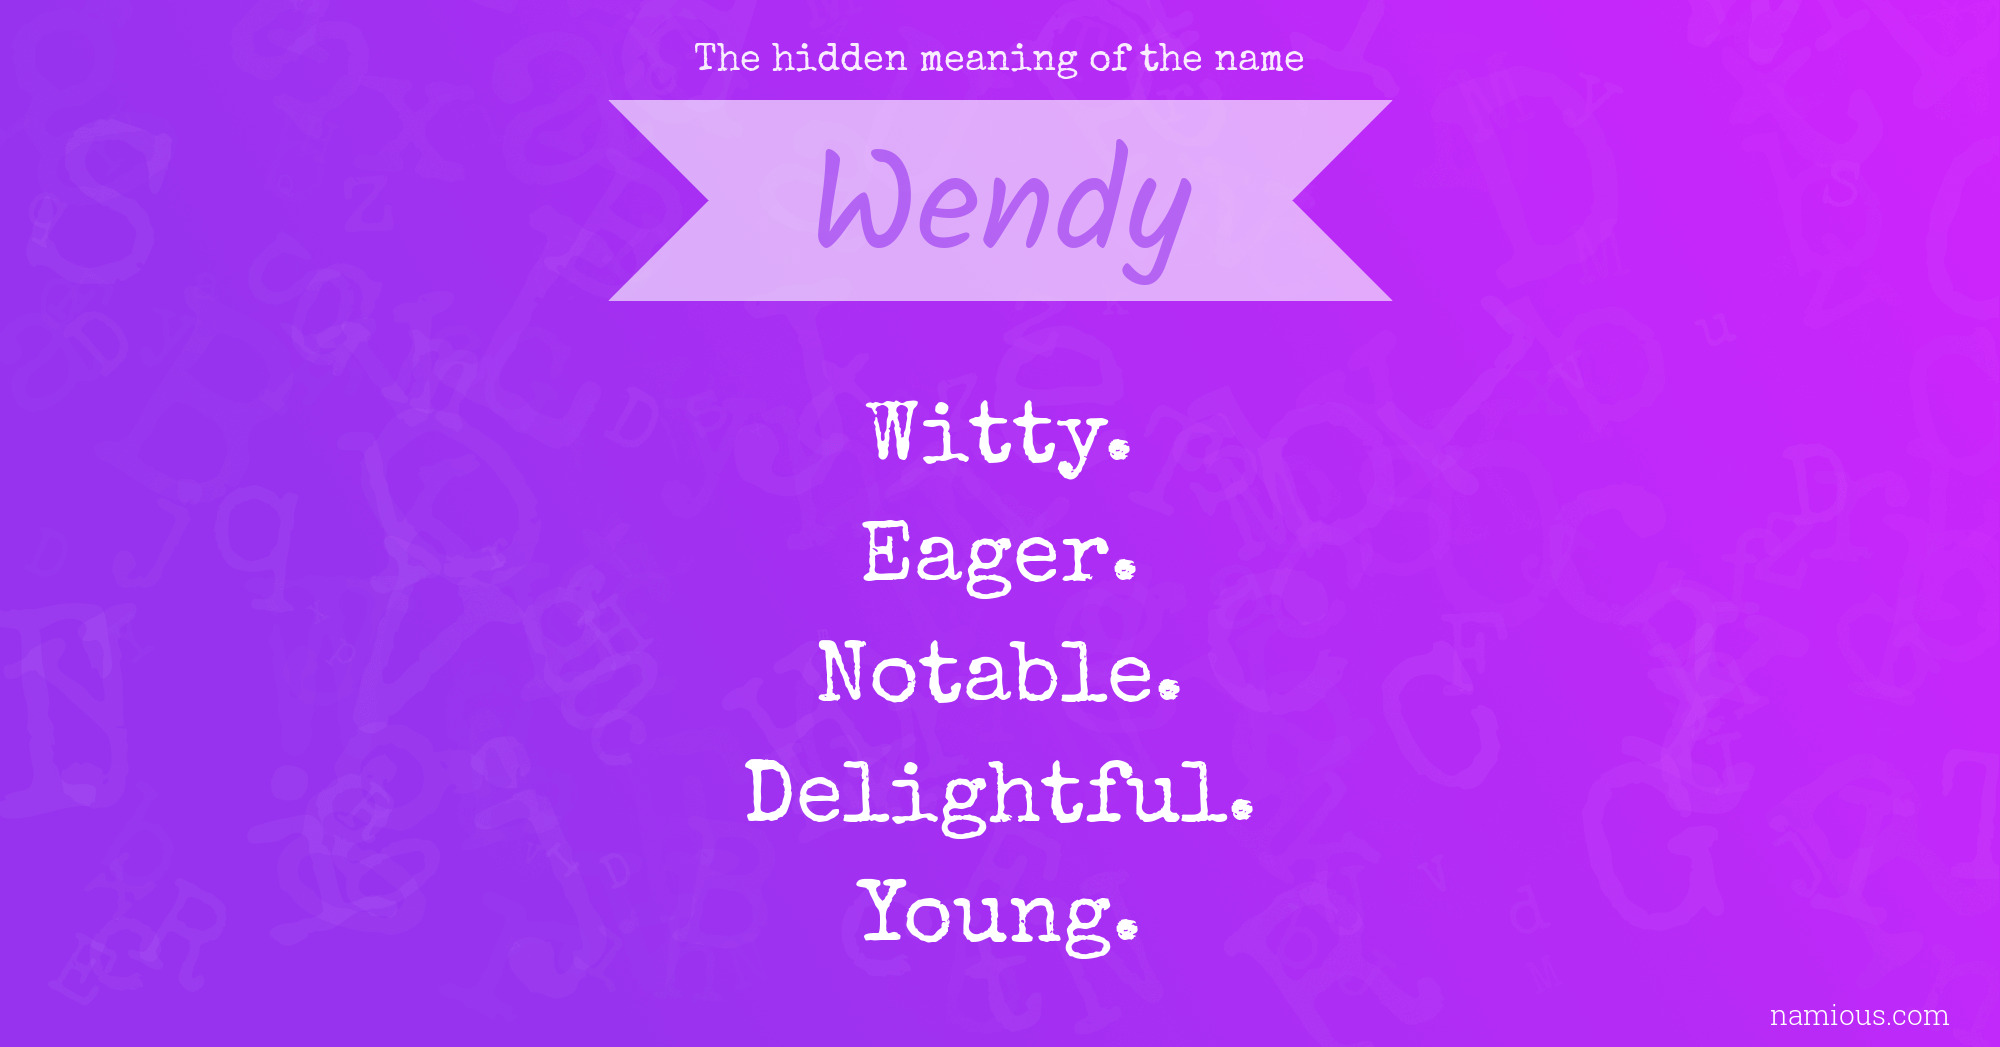 The hidden meaning of the name Wendy